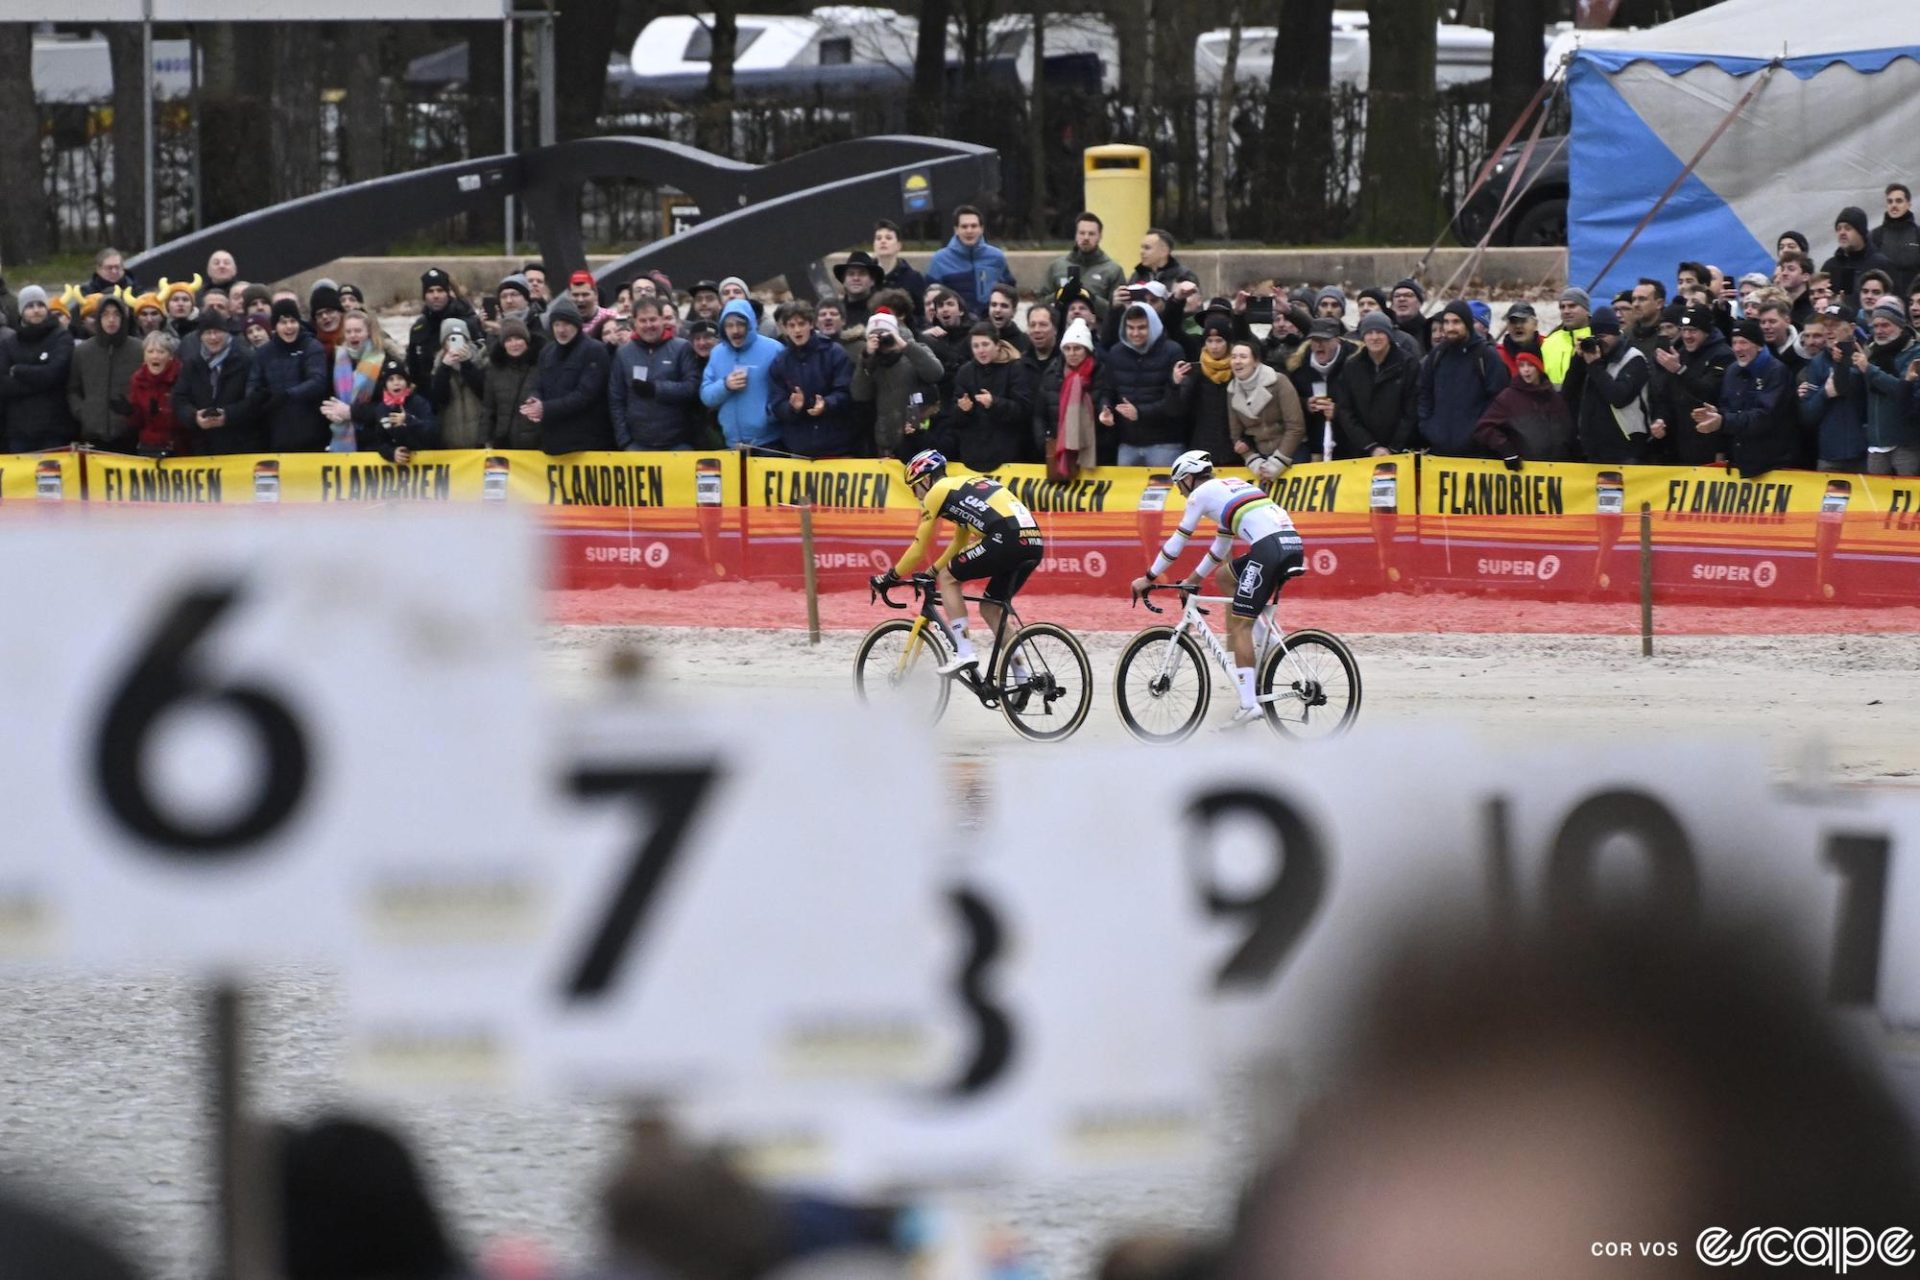 Wout van Aert leads Mathiu van der Poel in a sandy beach section at Zilvermeercross. The two are framed in front of a line of fans, looking out from the bike pit with numbered stalls.